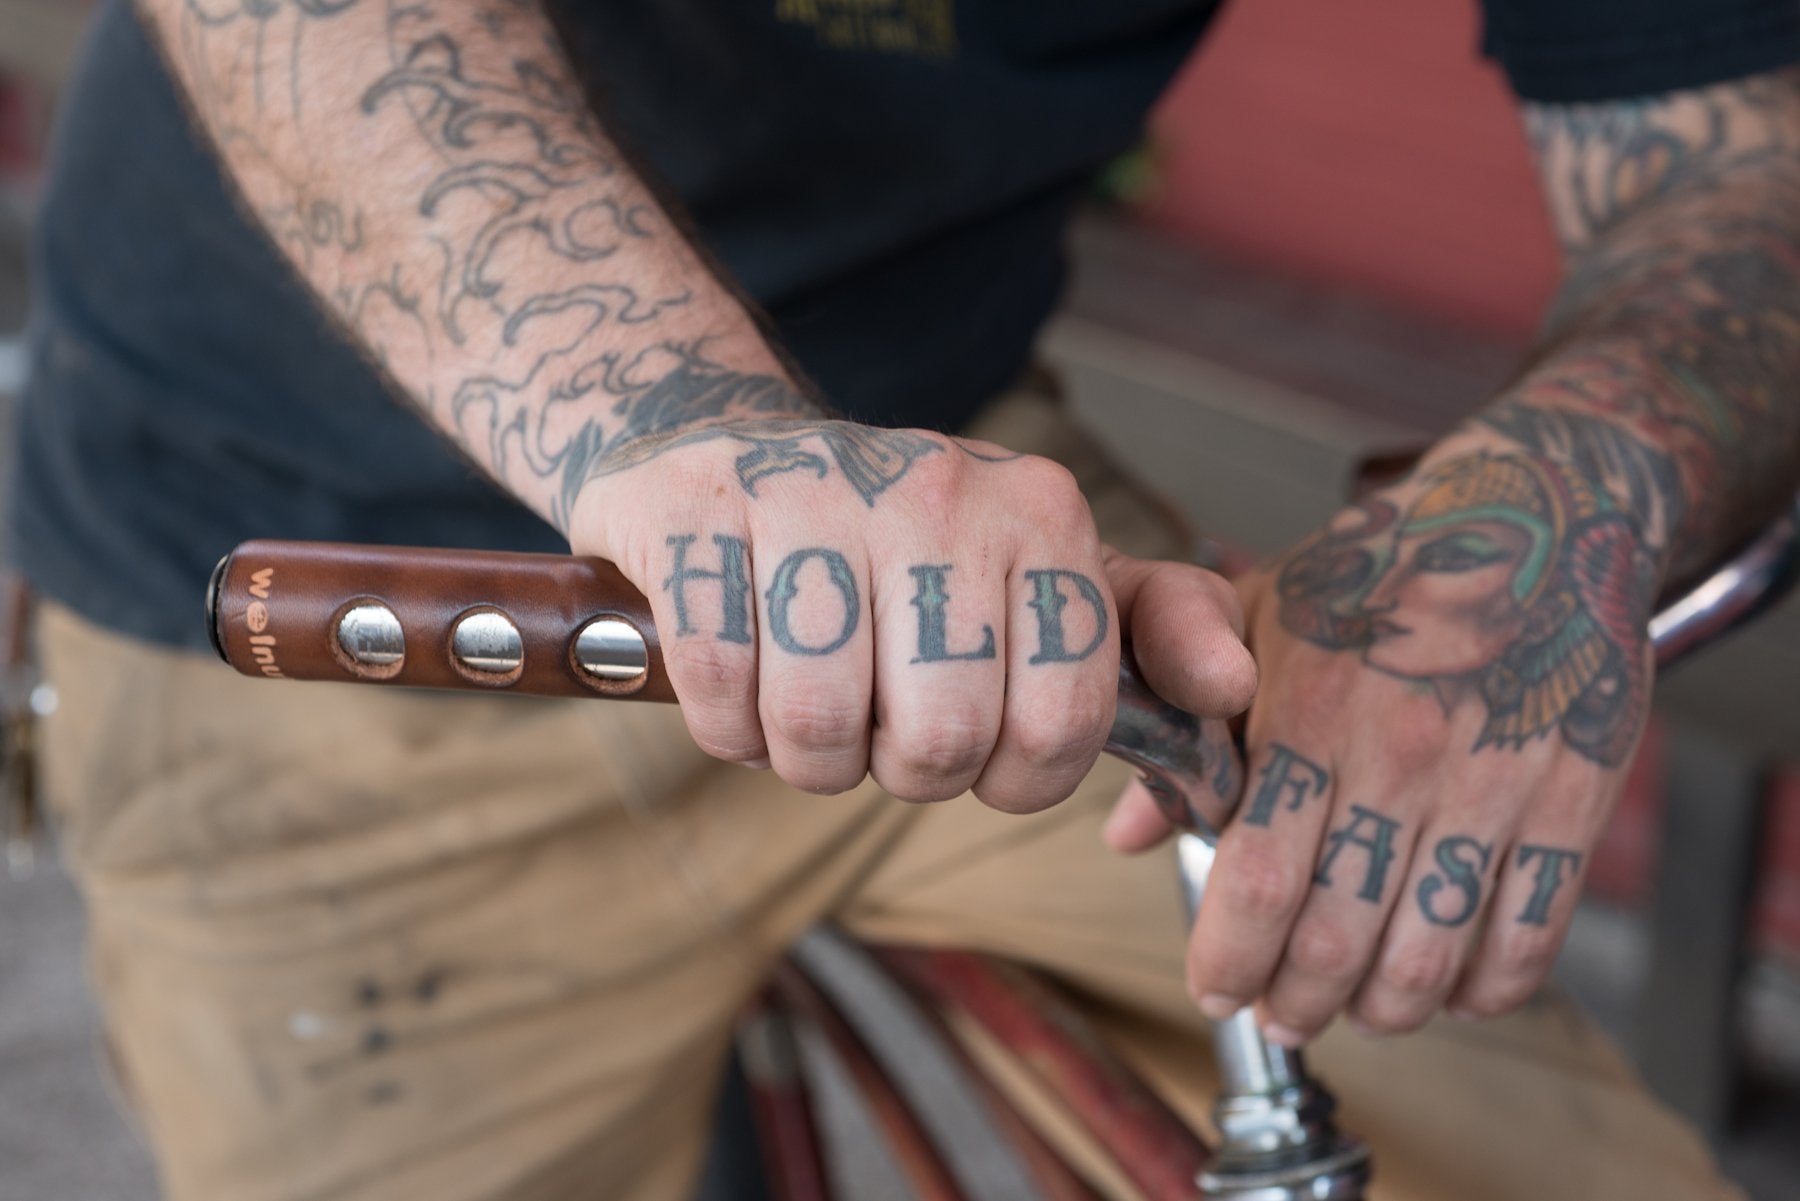 History of the "Hold Fast" Knuckle Tattoo